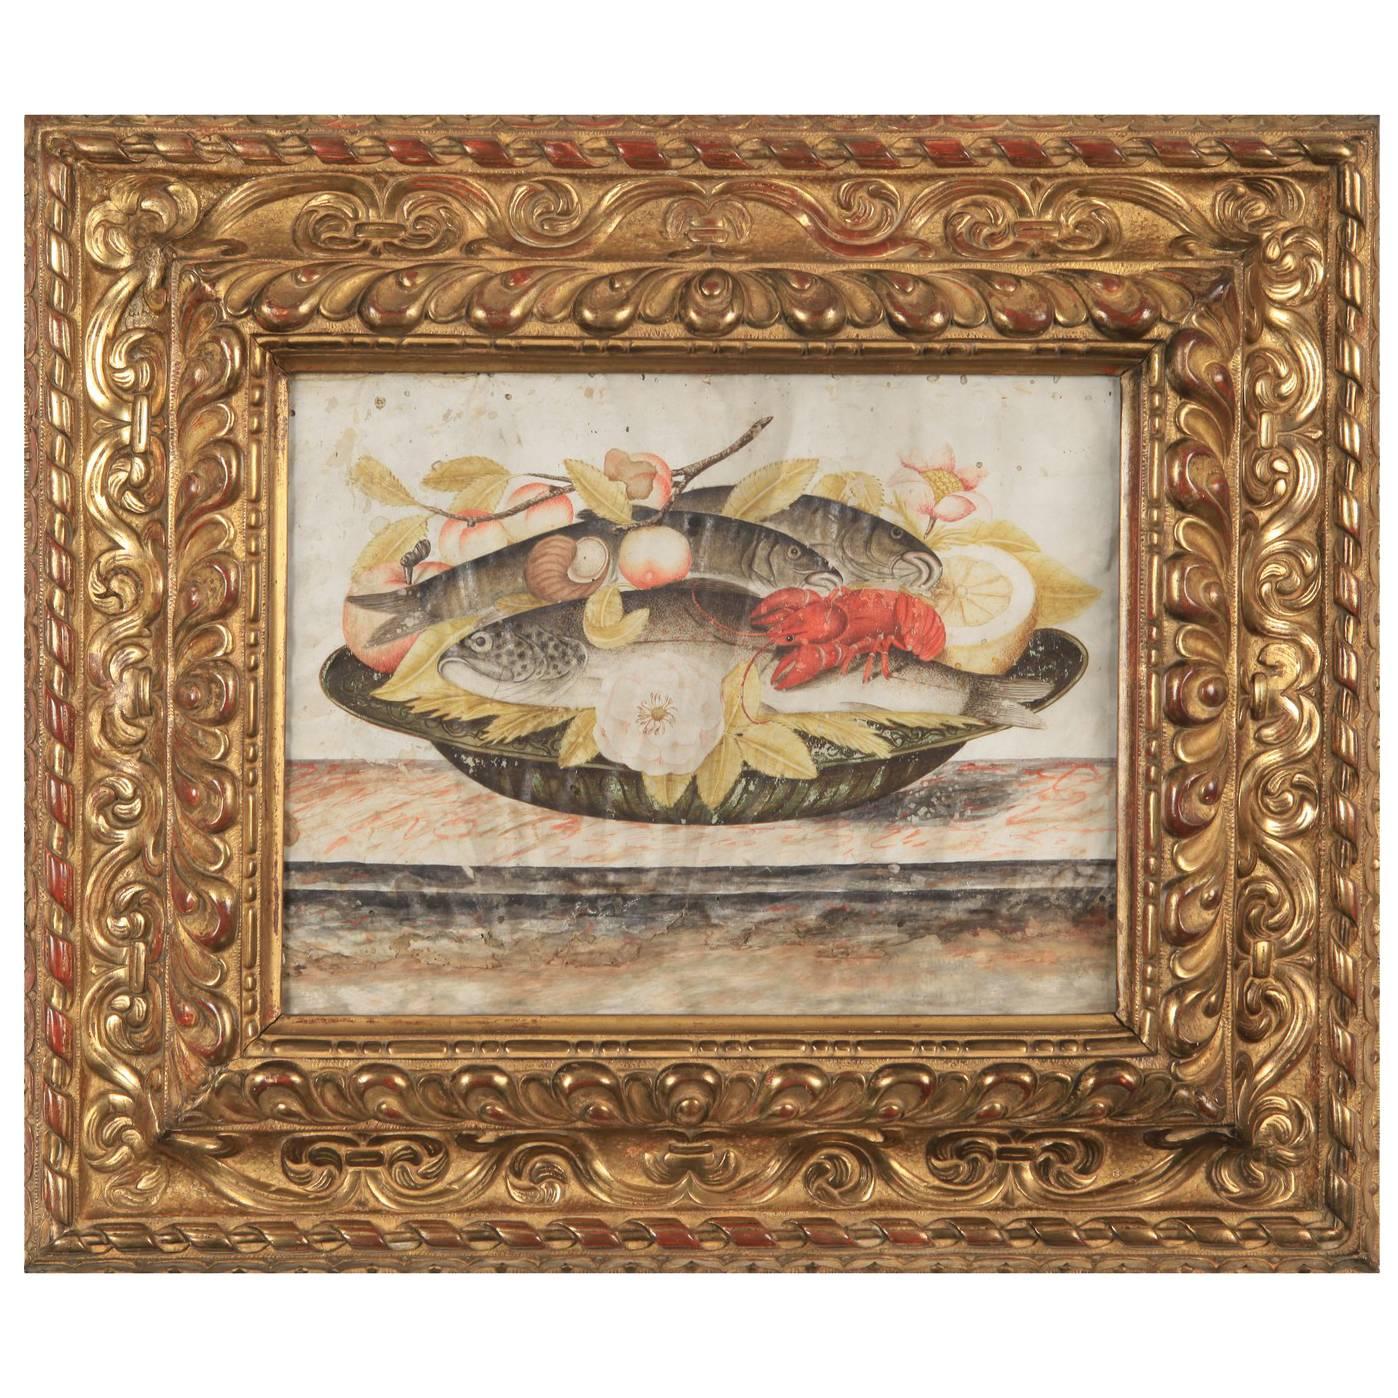 Octavianus Monfort "Still Life with Fruit, Flowers, Fish and Shellfish" For Sale